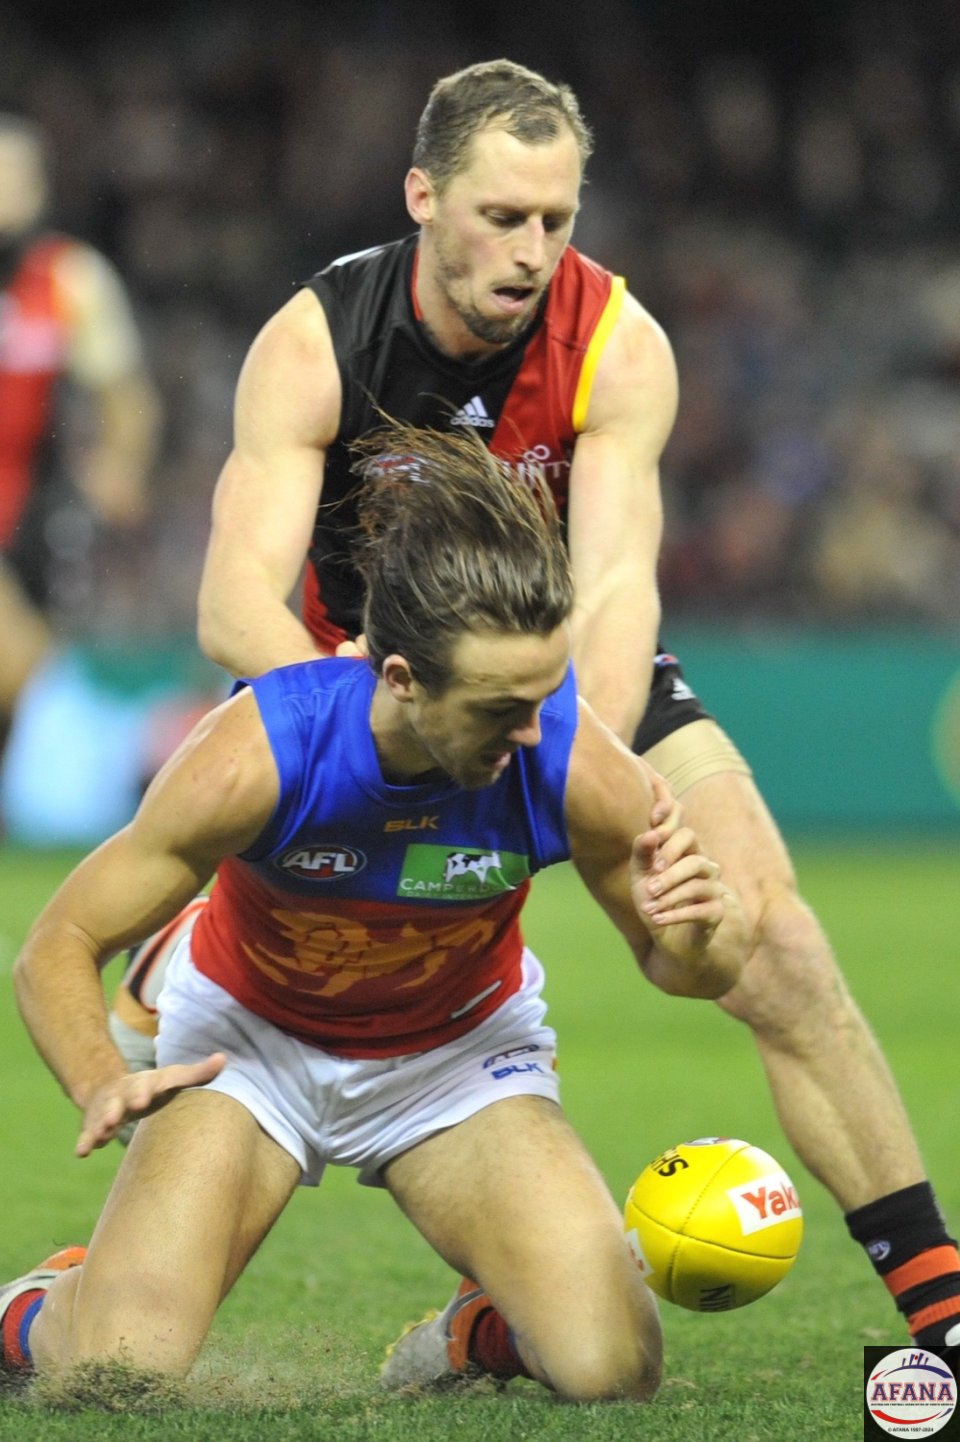 James Kelly spoils Rhys Mathieson attack on the ball